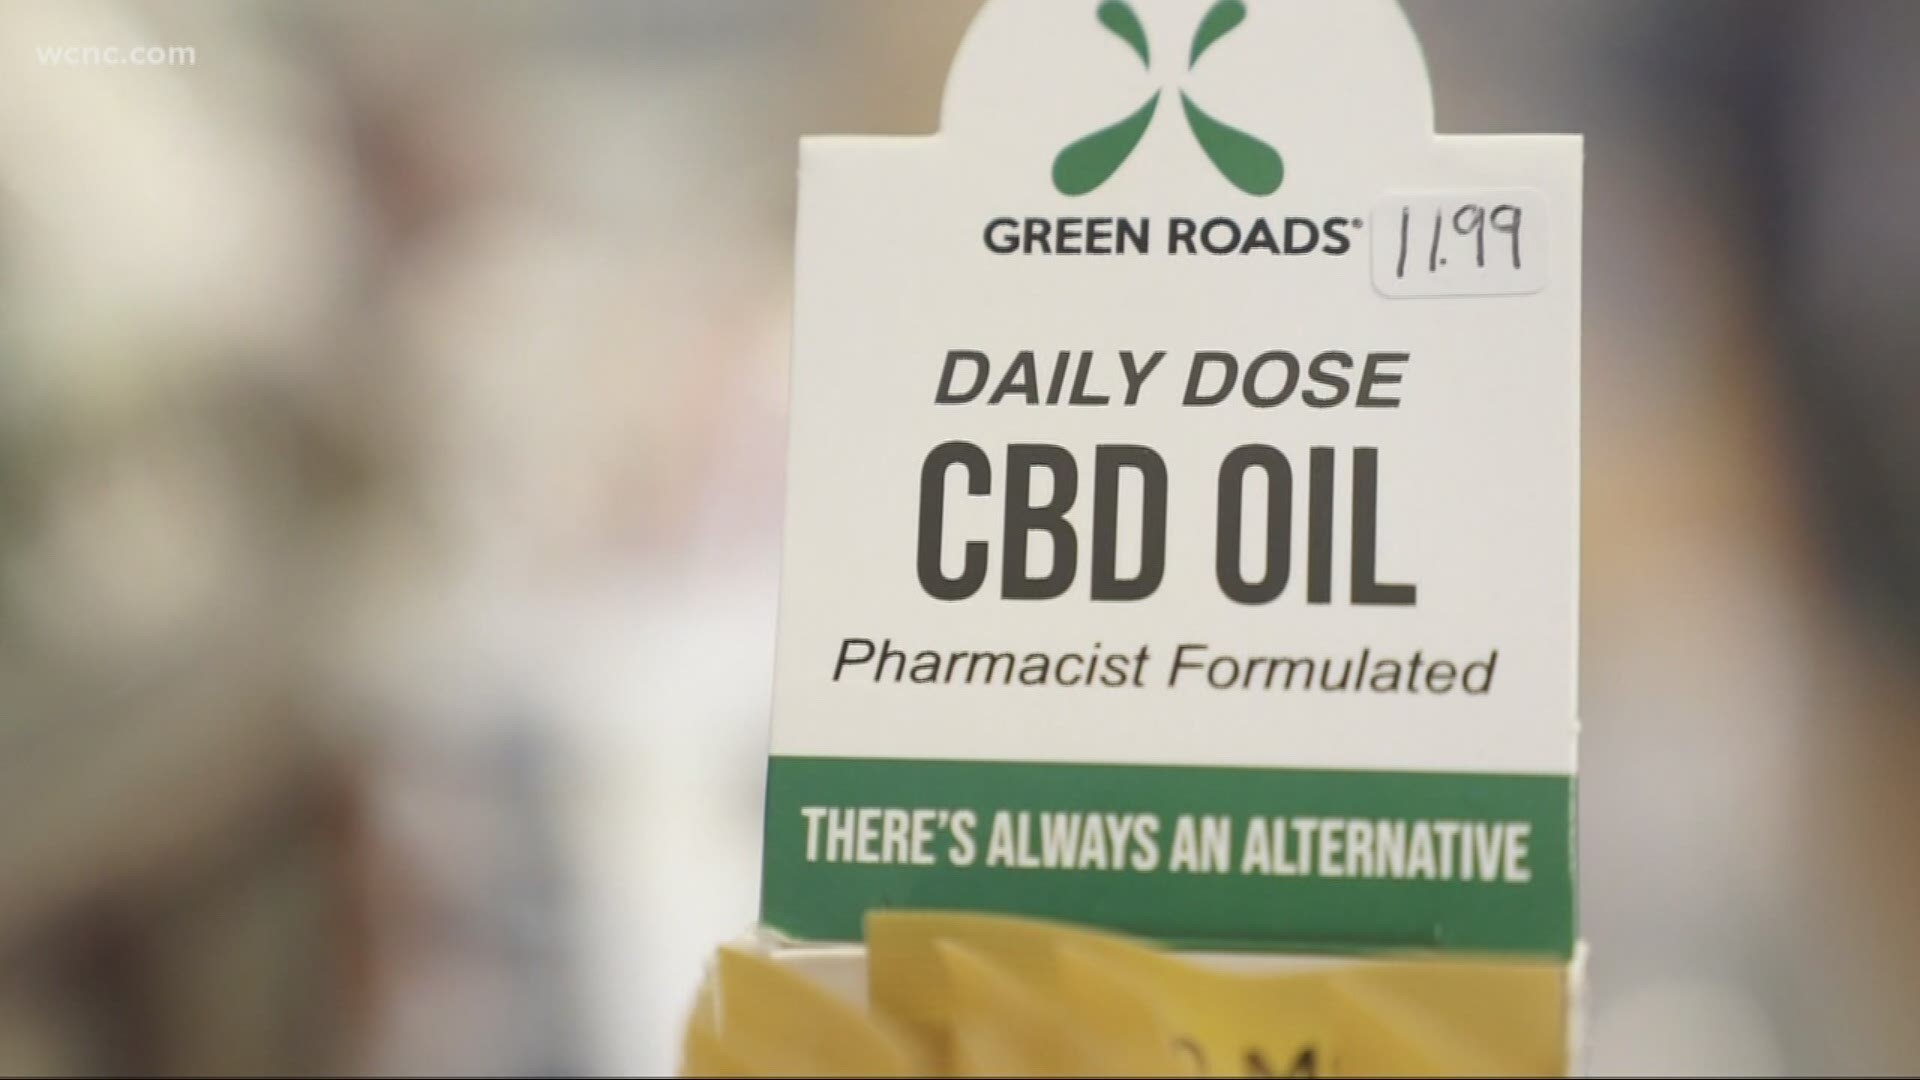 Popular clothing brand American Eagle announced they will partner with Green Roads to sell CBD oil-infused products, such as body lotion, in their stores.